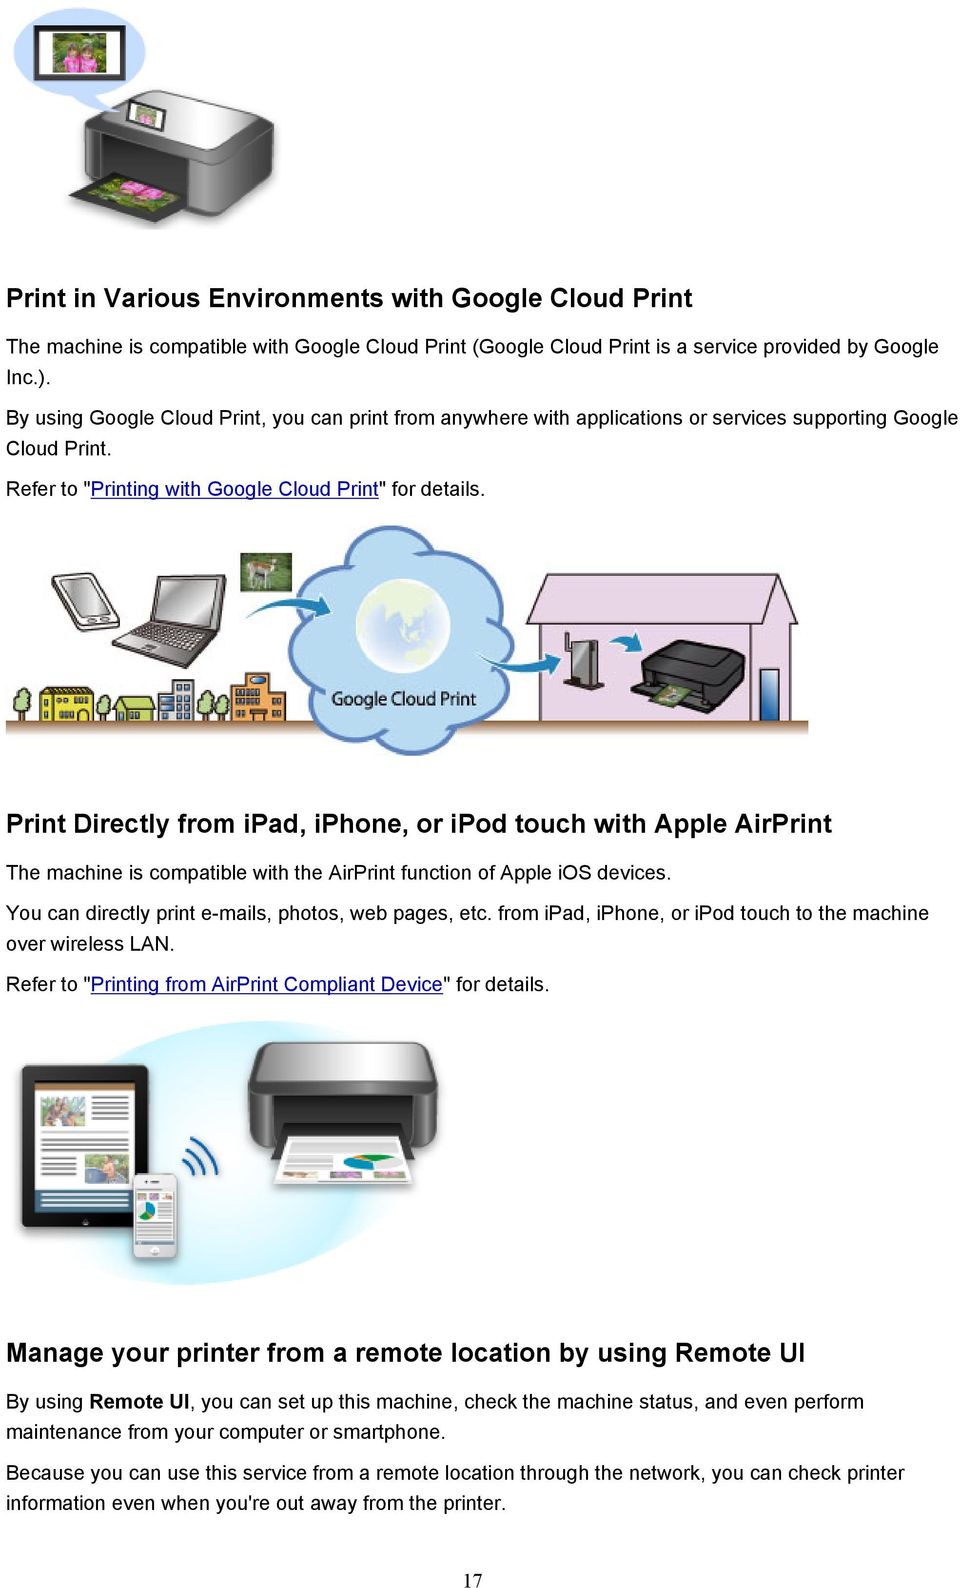 Print Directly from ipad, iphone, or ipod touch with Apple AirPrint The machine is compatible with the AirPrint function of Apple ios devices. You can directly print e-mails, photos, web pages, etc.